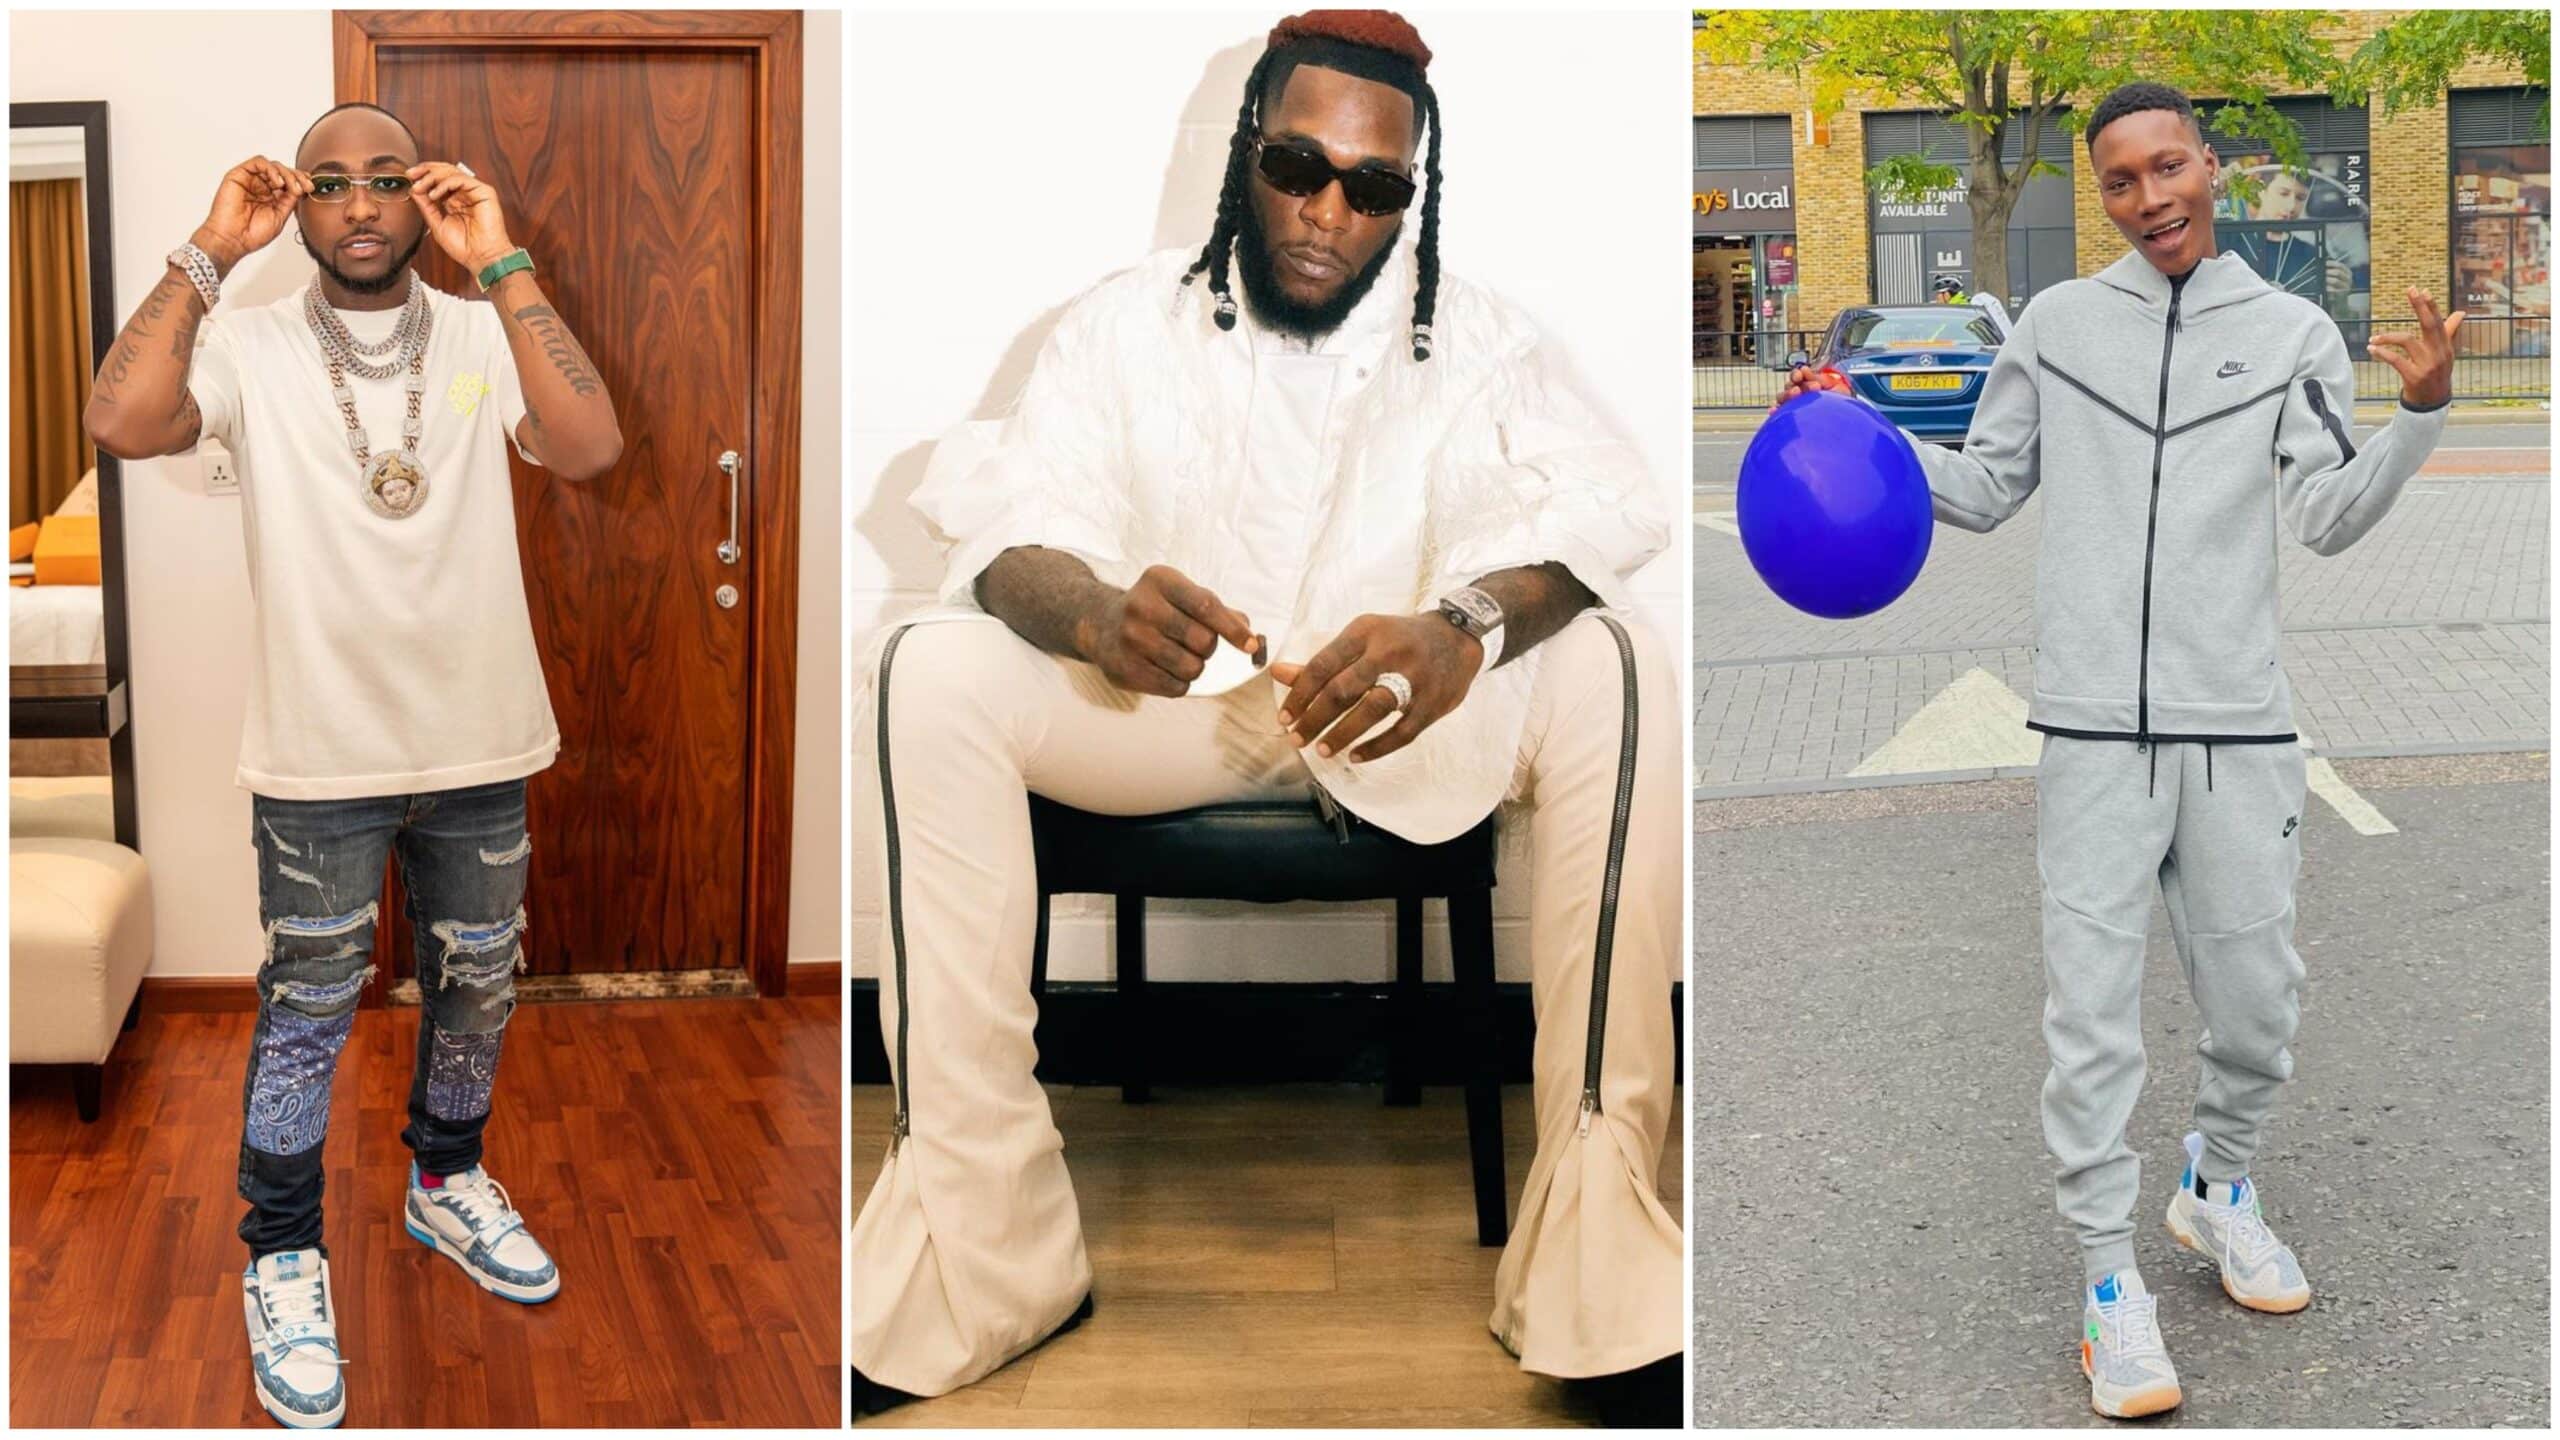 Davido, Burna Boy, Zinoleesky, to Drop Music on the Same Day, Fans Debate on Who Will Be Number 1